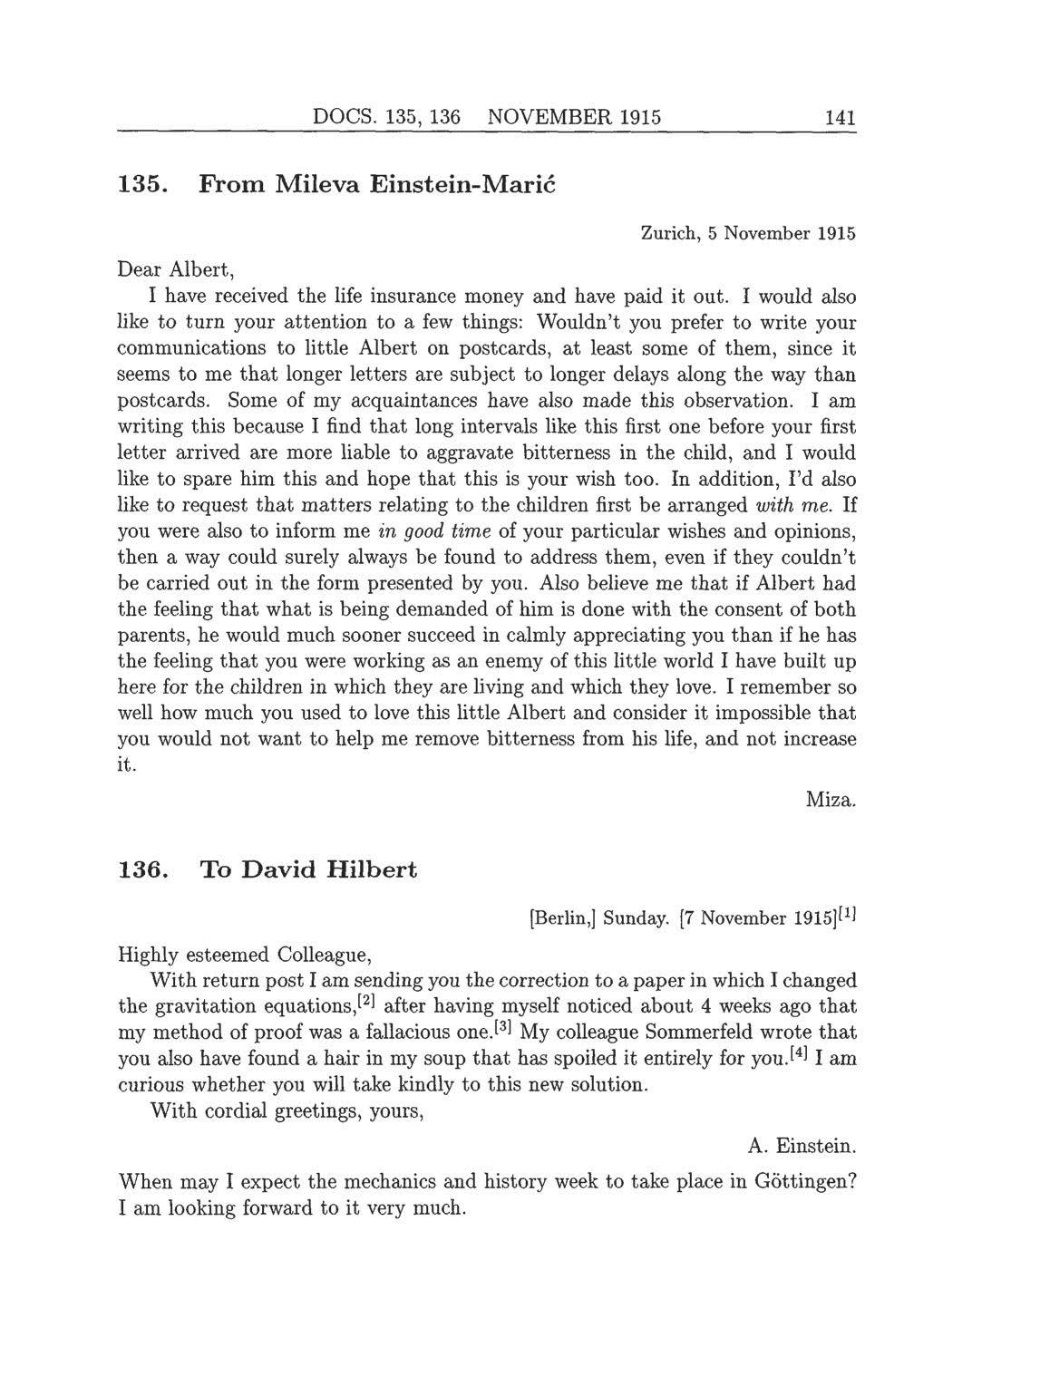 Volume 8: The Berlin Years: Correspondence, 1914-1918 (English translation supplement) page 141